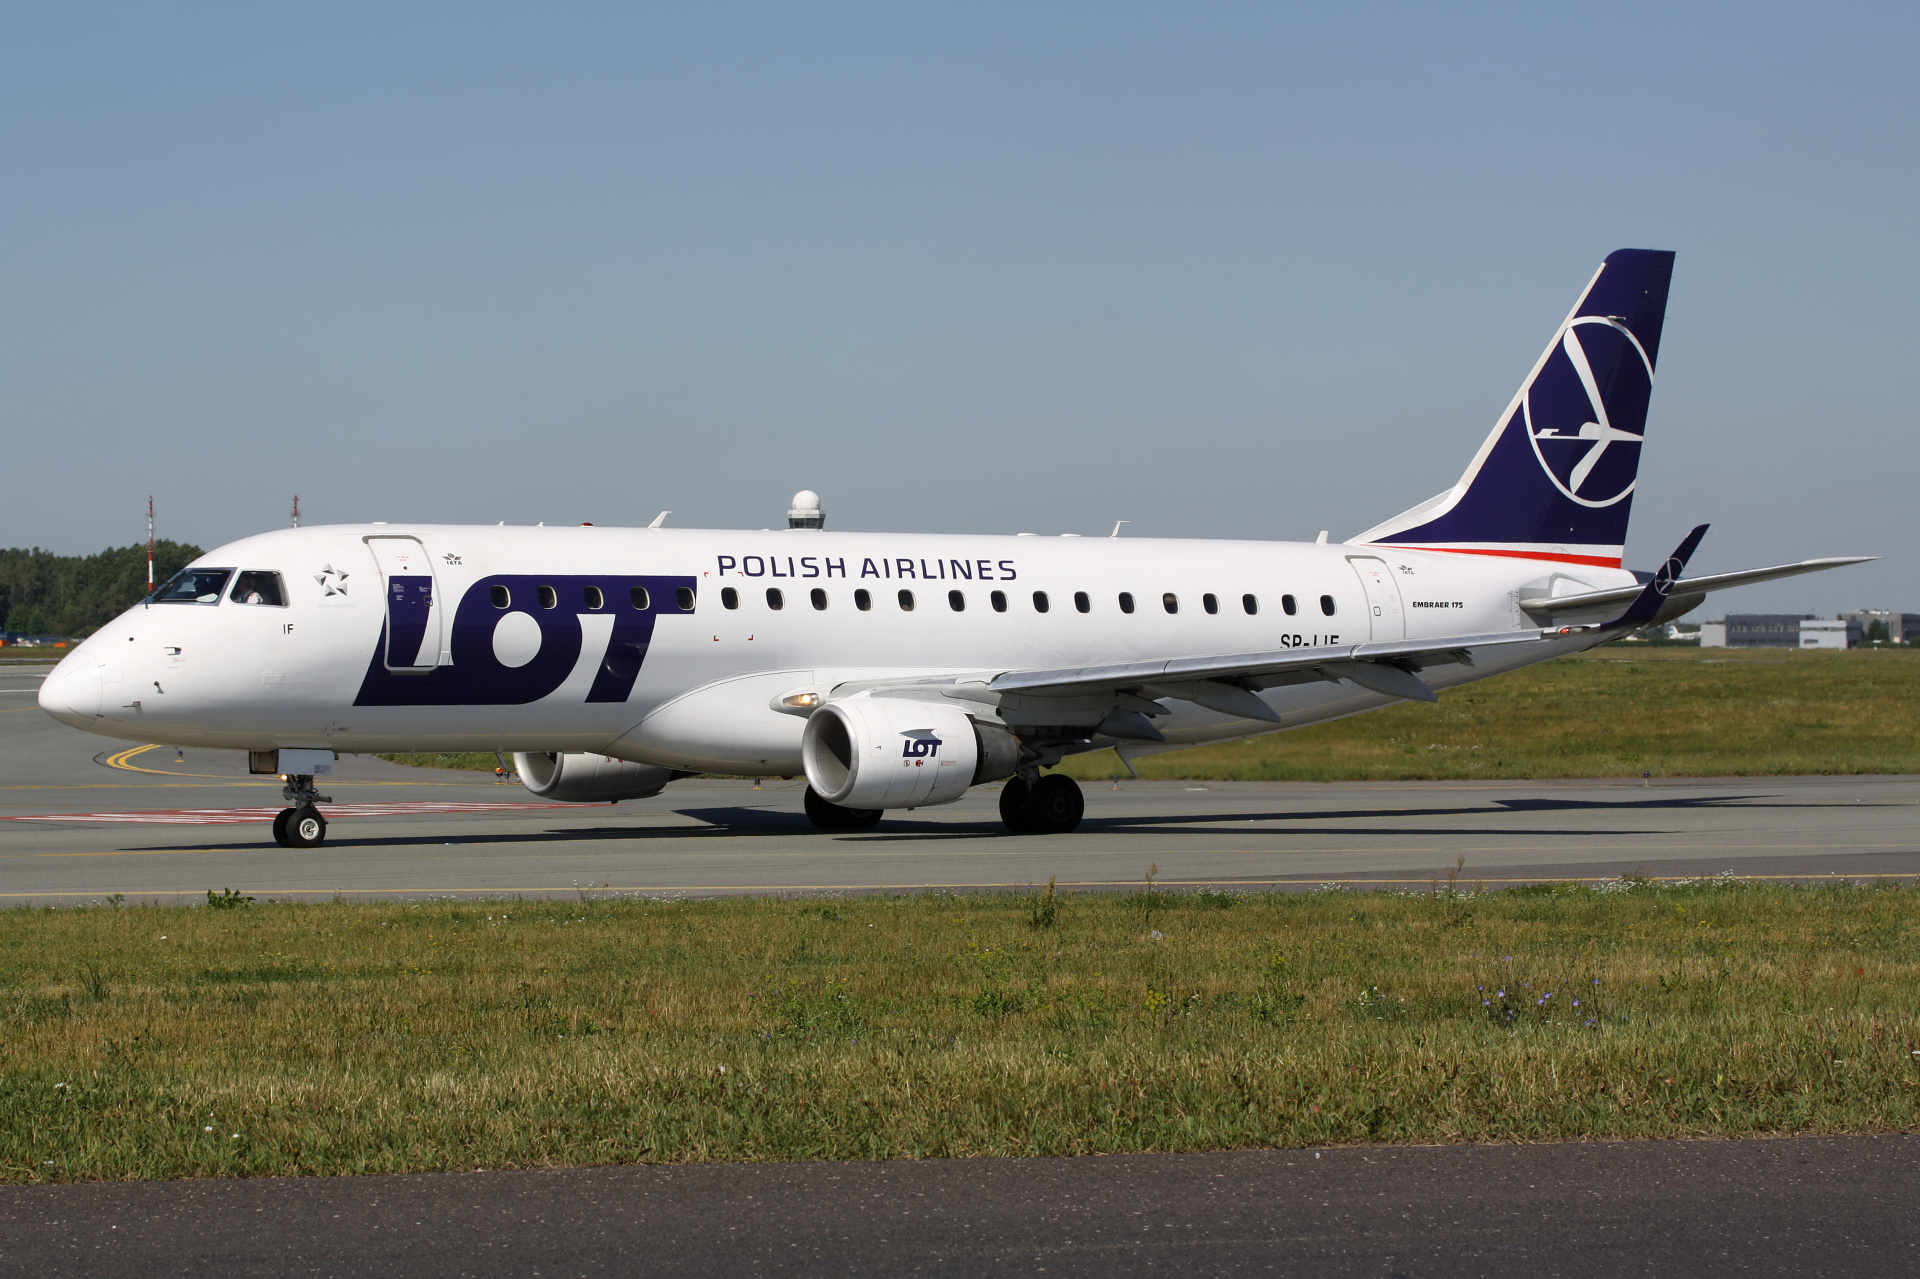 SP-LIF (new livery) (Aircraft » EPWA Spotting » Embraer E175 » LOT Polish Airlines)